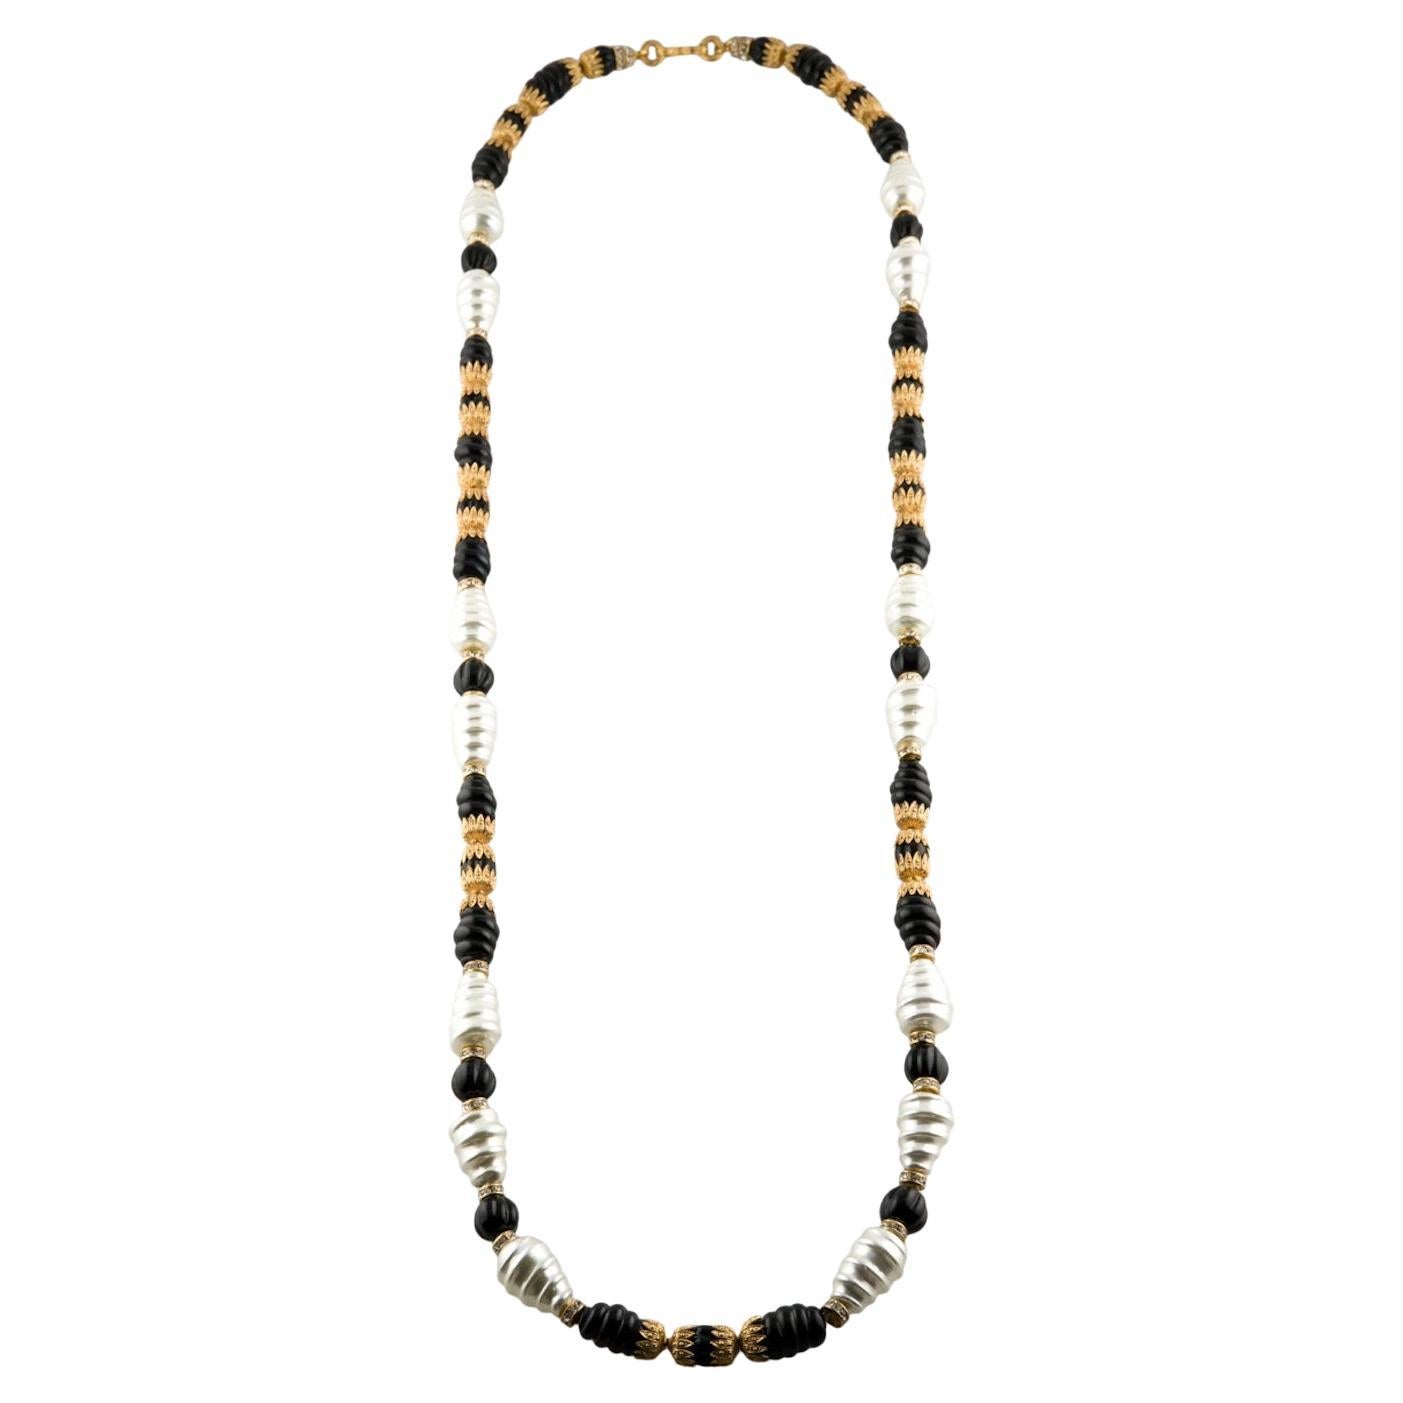 Vintage Chanel Glass Pearl and Strass Black&White Necklace, 1985